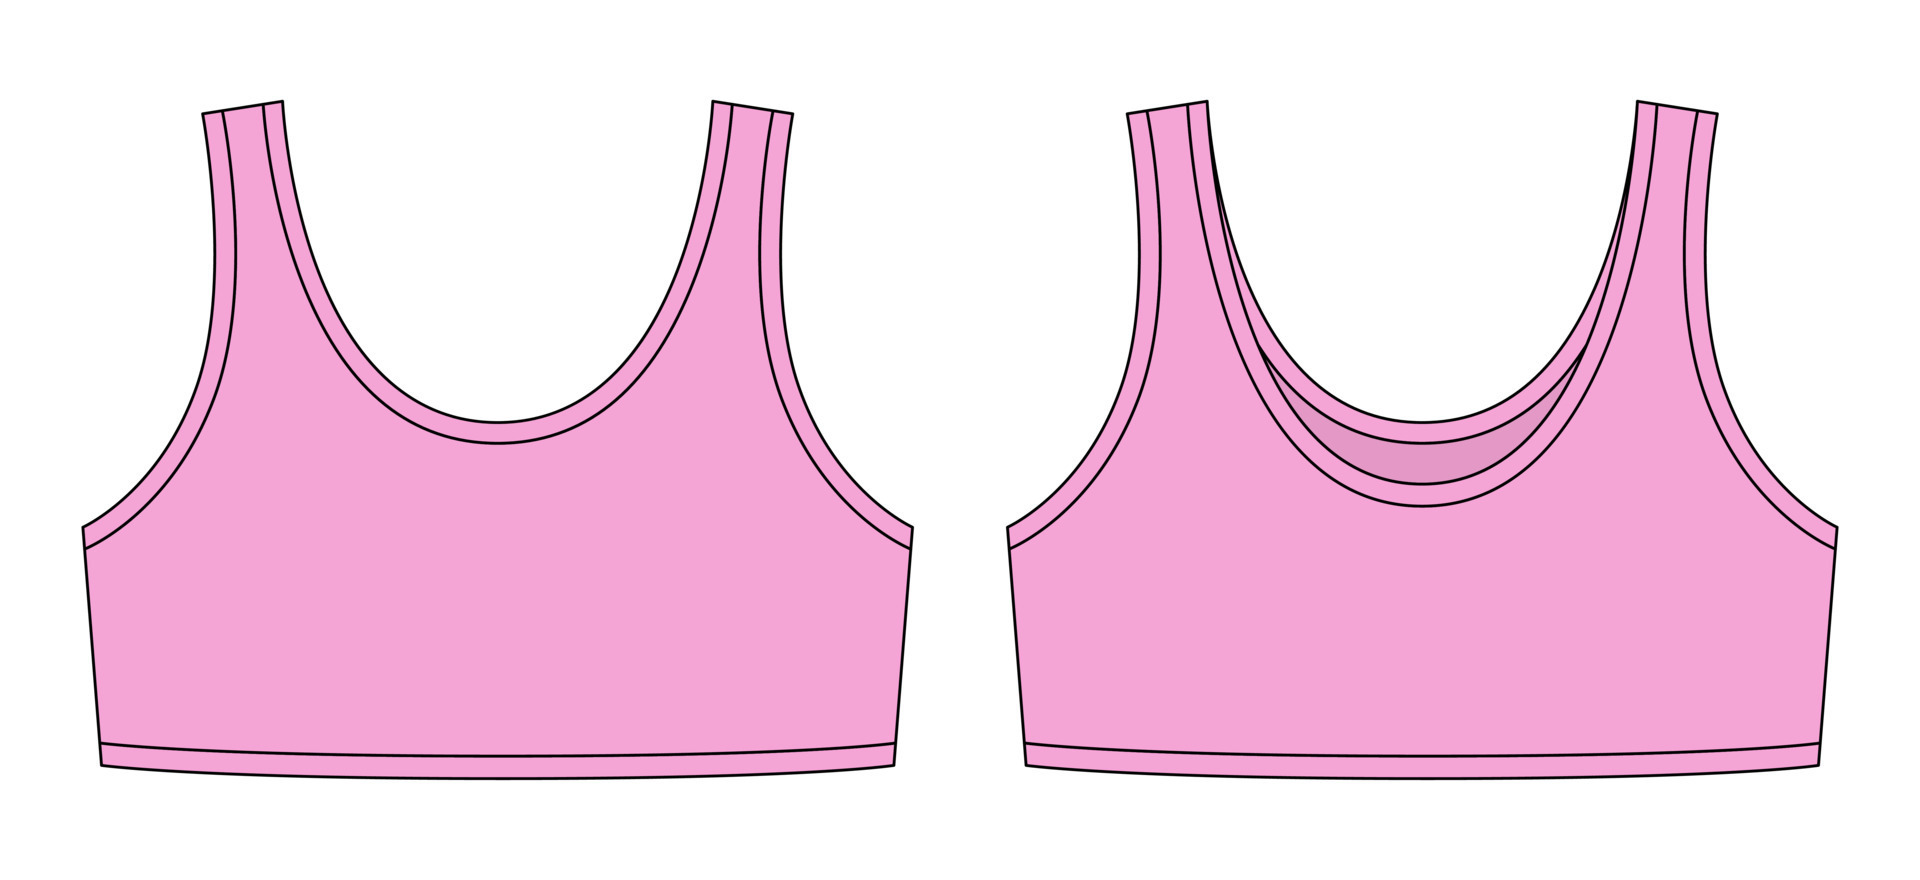 https://static.vecteezy.com/system/resources/previews/015/699/911/original/girl-bra-technical-sketch-illustration-pink-color-casual-underclothing-vector.jpg